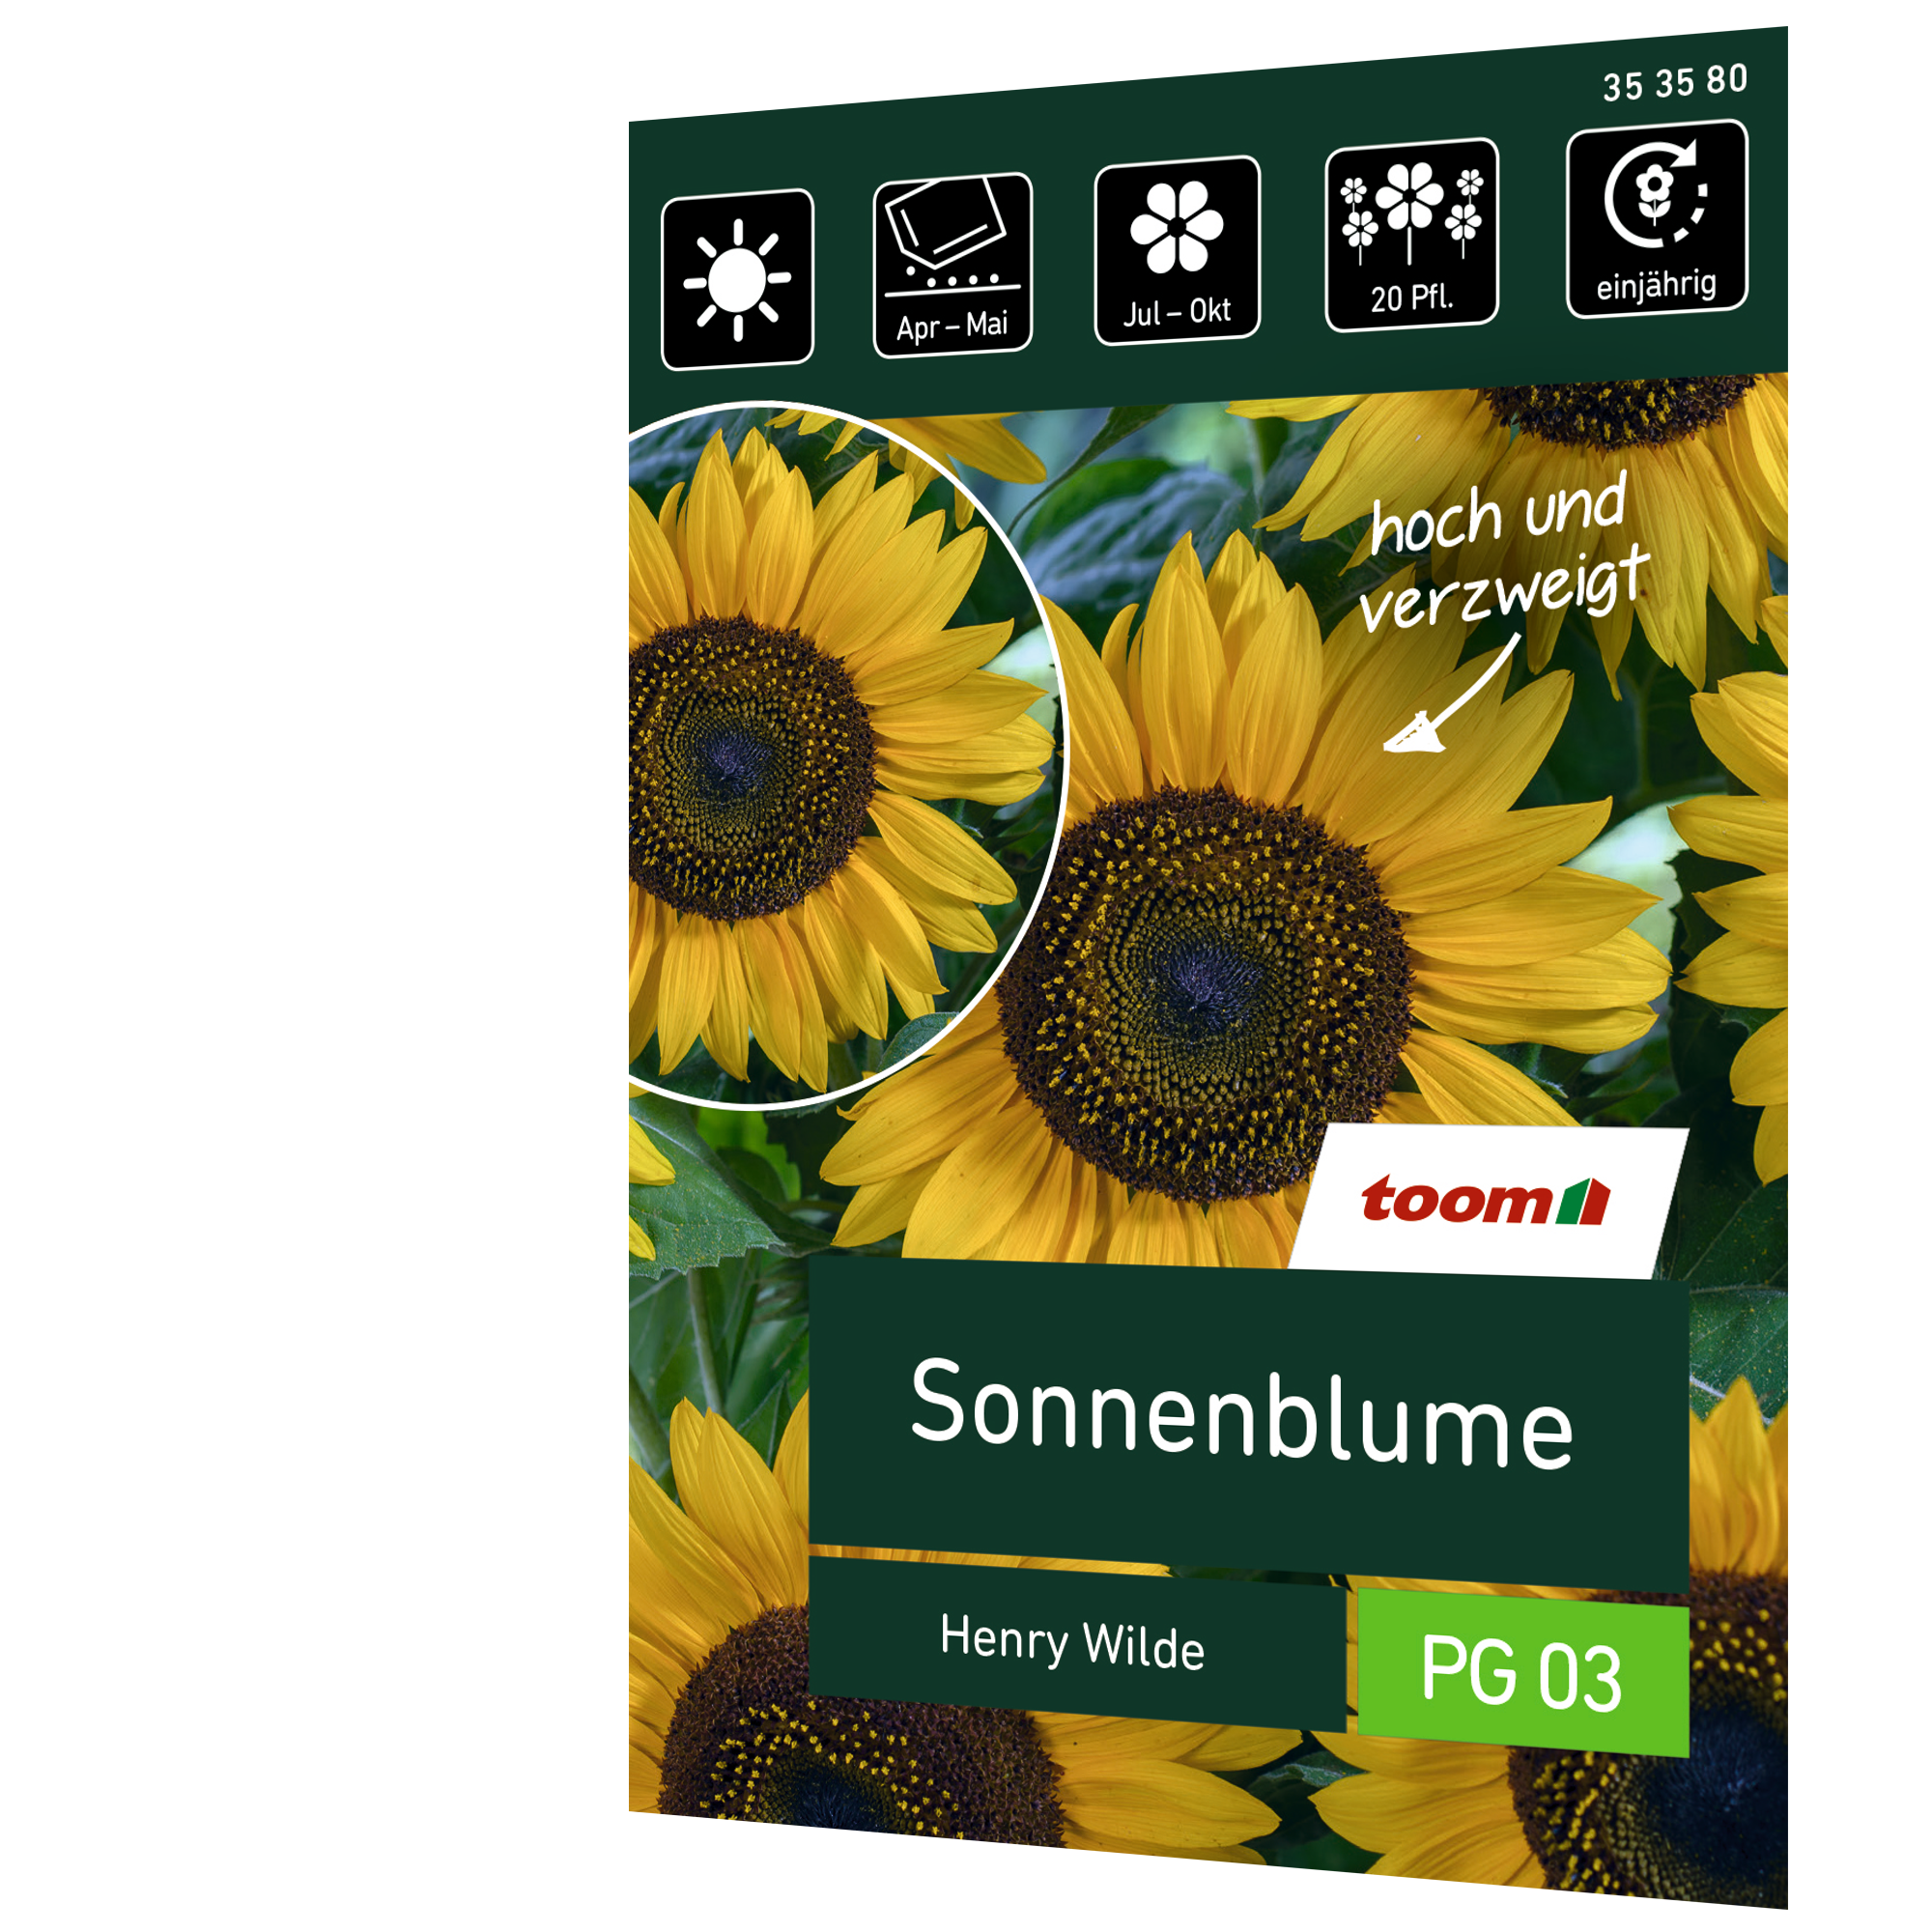 Sonnenblume 'Henry Wilde' + product picture